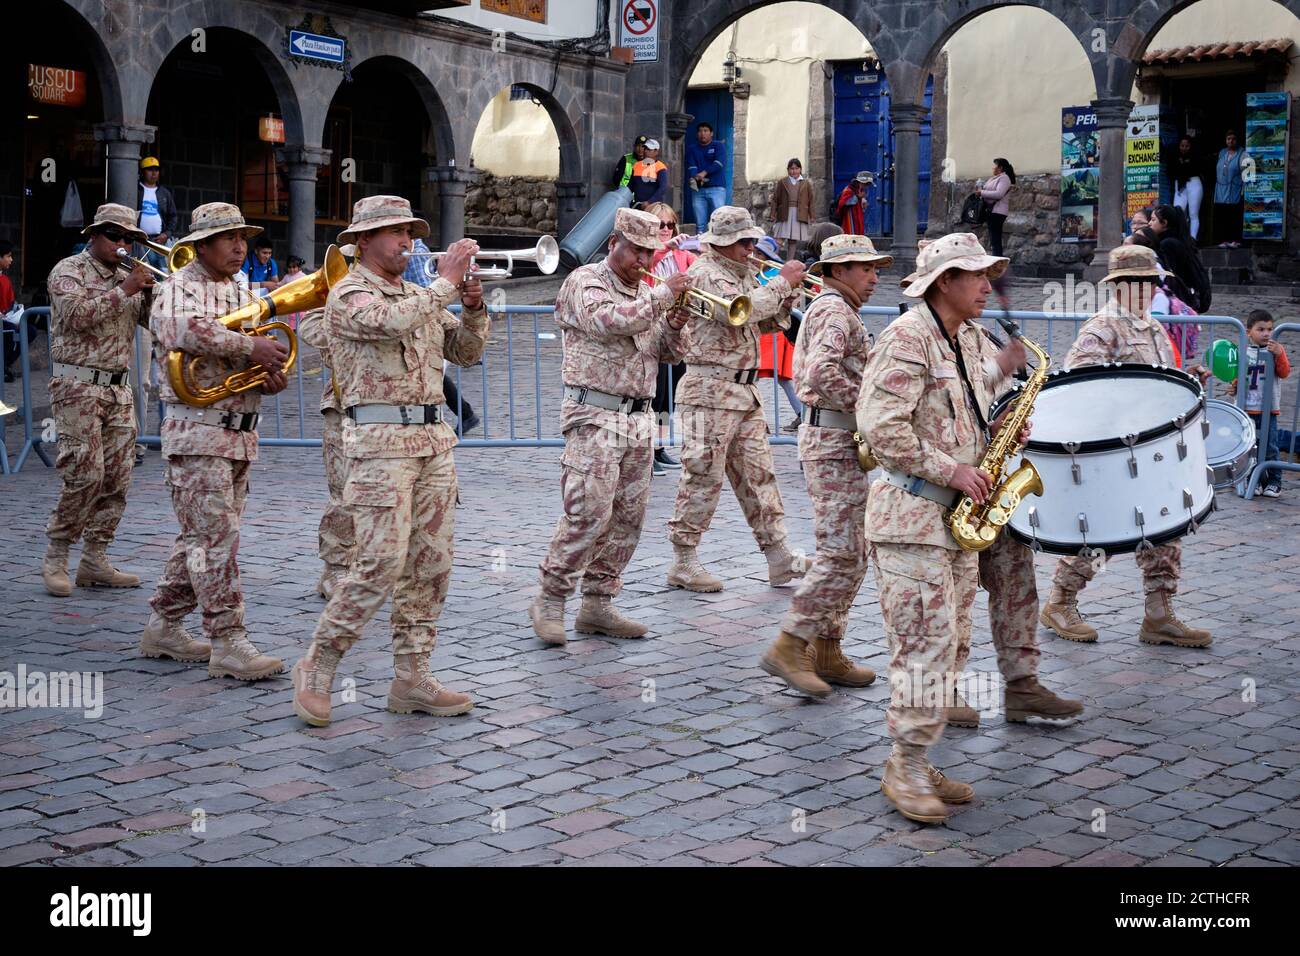 An all-male Peruvian army band play a variety of instruments in a parade during the Inti Raymi'rata sun festival over the winter solstice, Cusco, Peru Stock Photo